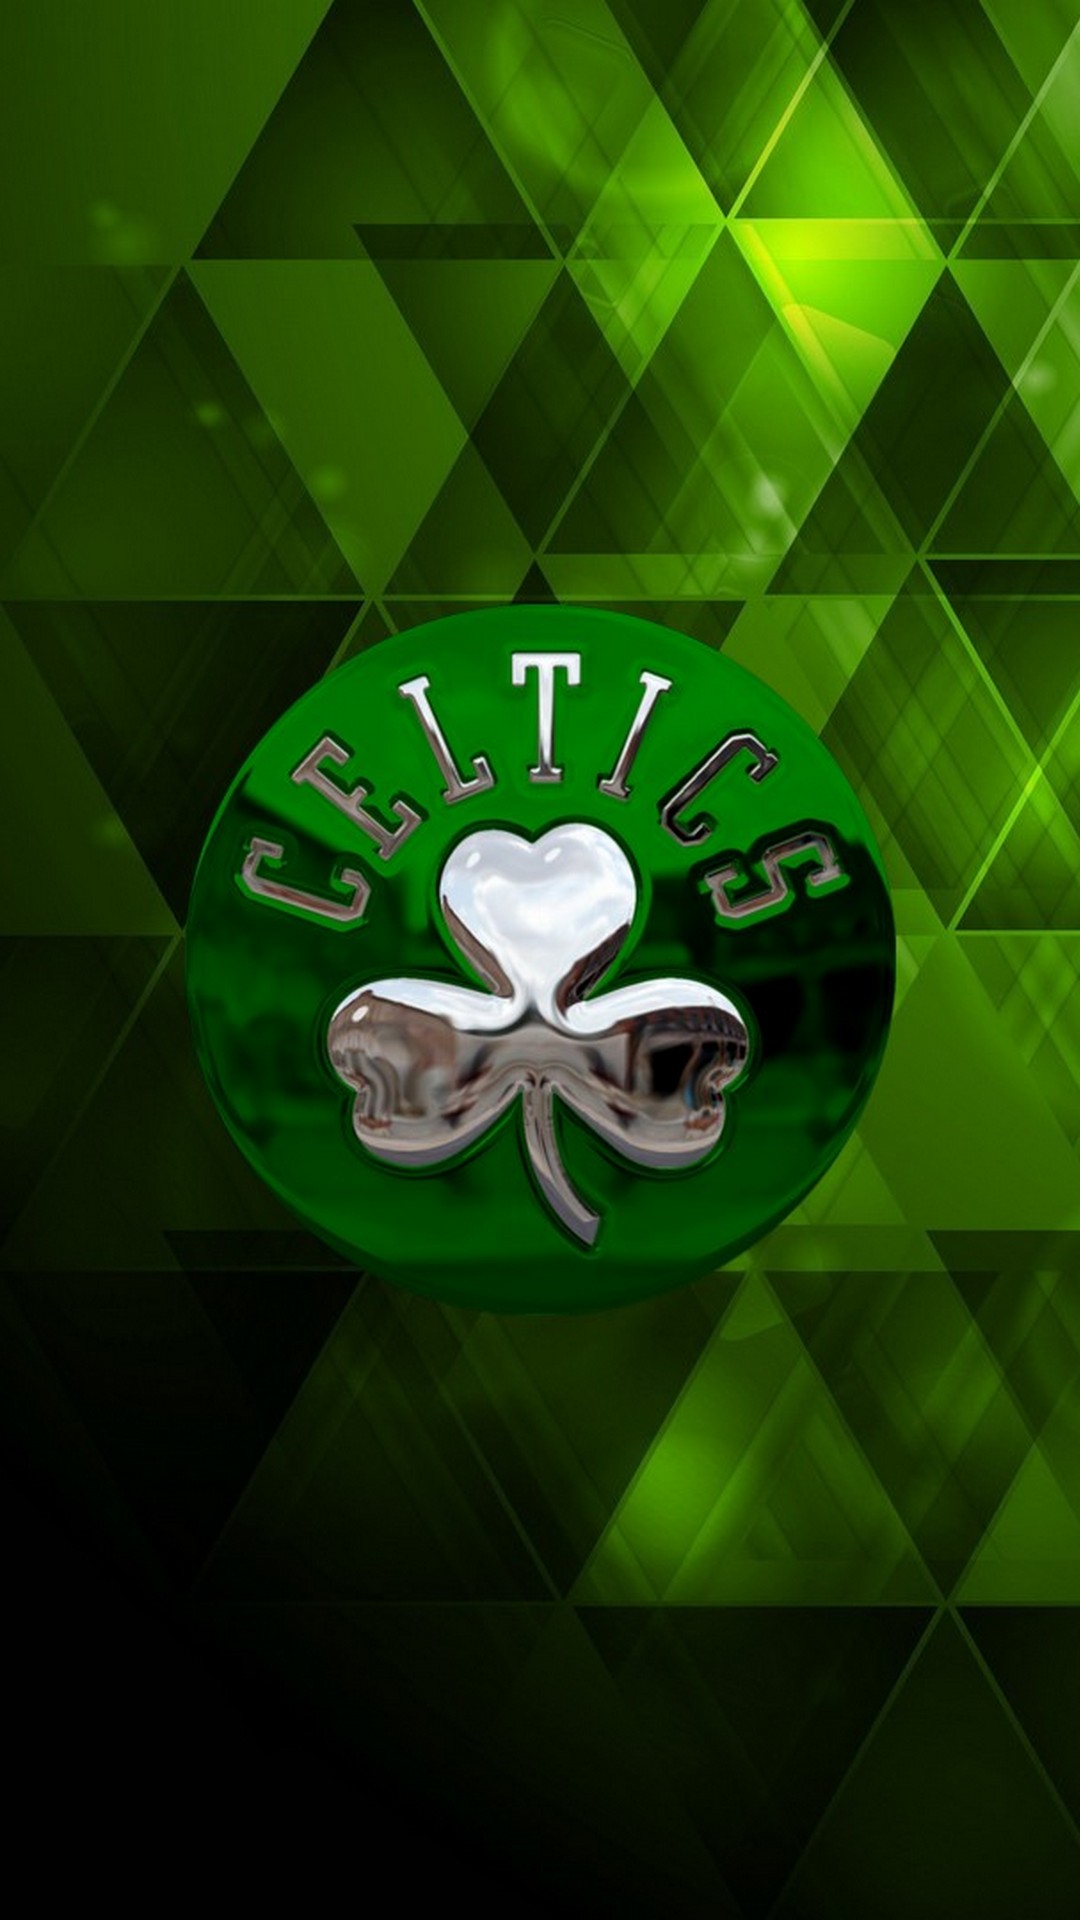 Boston Celtics Phone Backgrounds With Resolution 1080X1920 pixel. You can make this wallpaper for your Desktop Computer Backgrounds, Mac Wallpapers, Android Lock screen or iPhone Screensavers